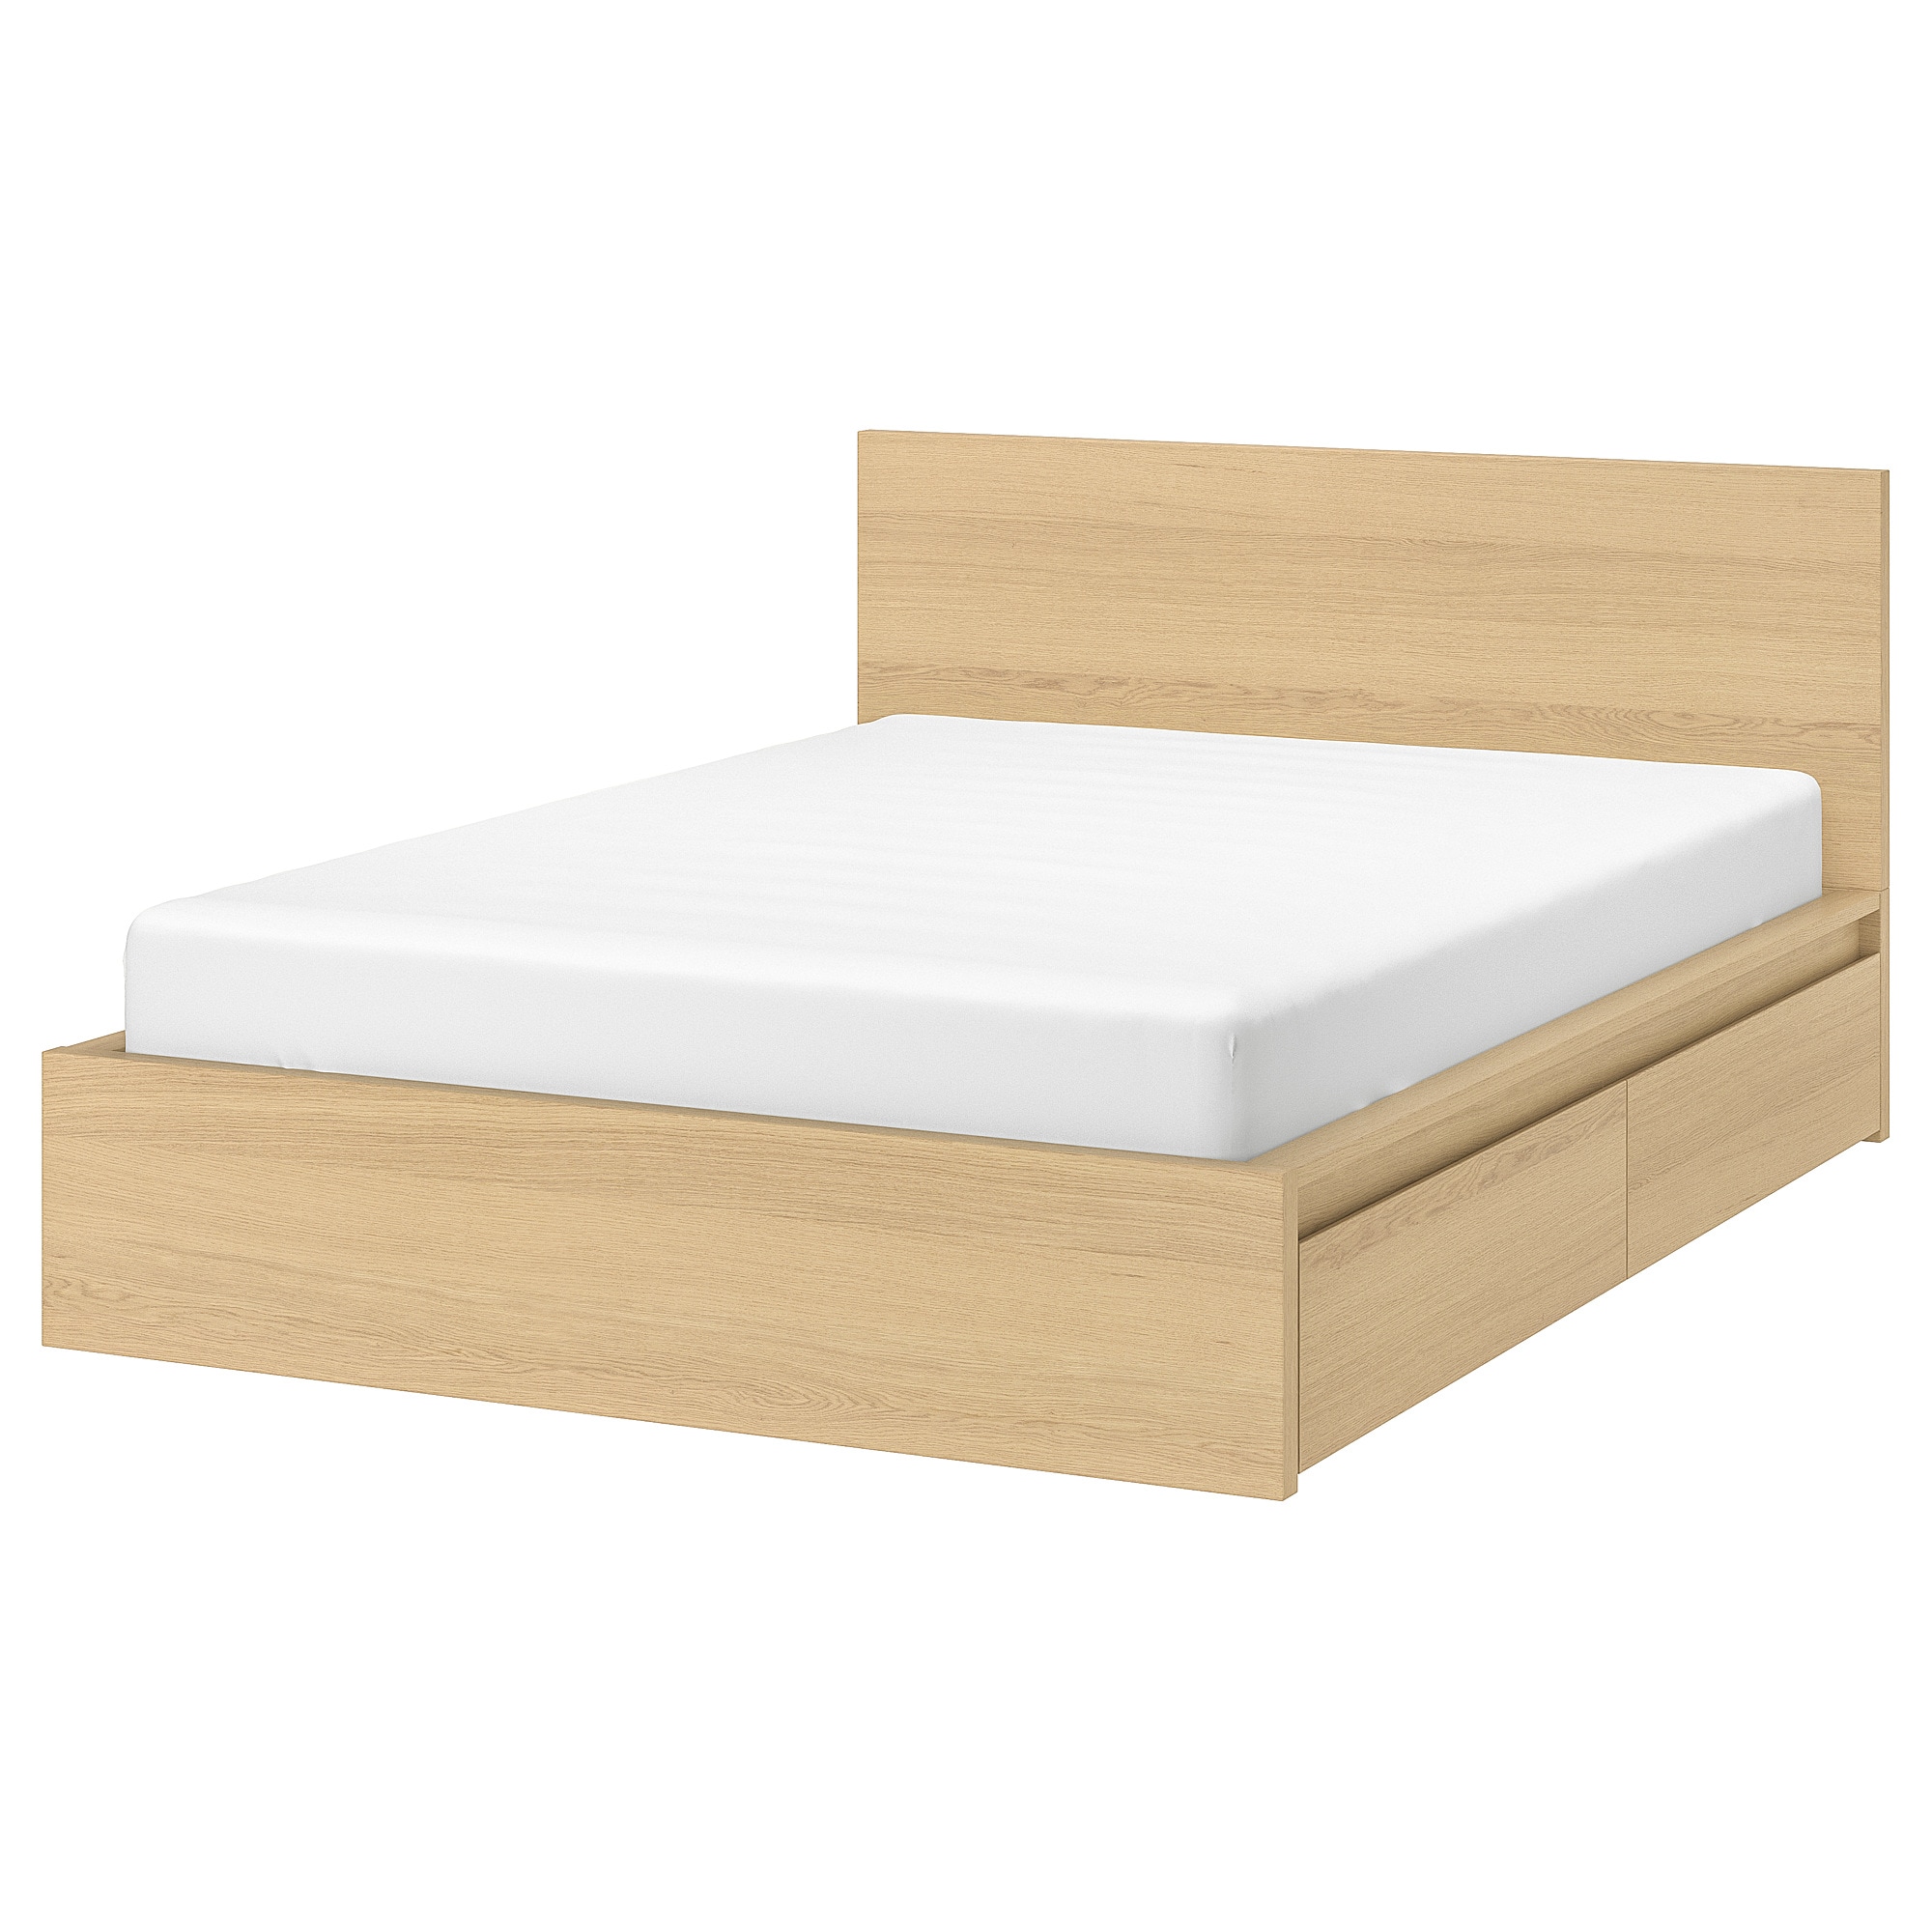 Malm Bed Frame High Luroy With 2, White King Size Bed Frame With Storage Ikea